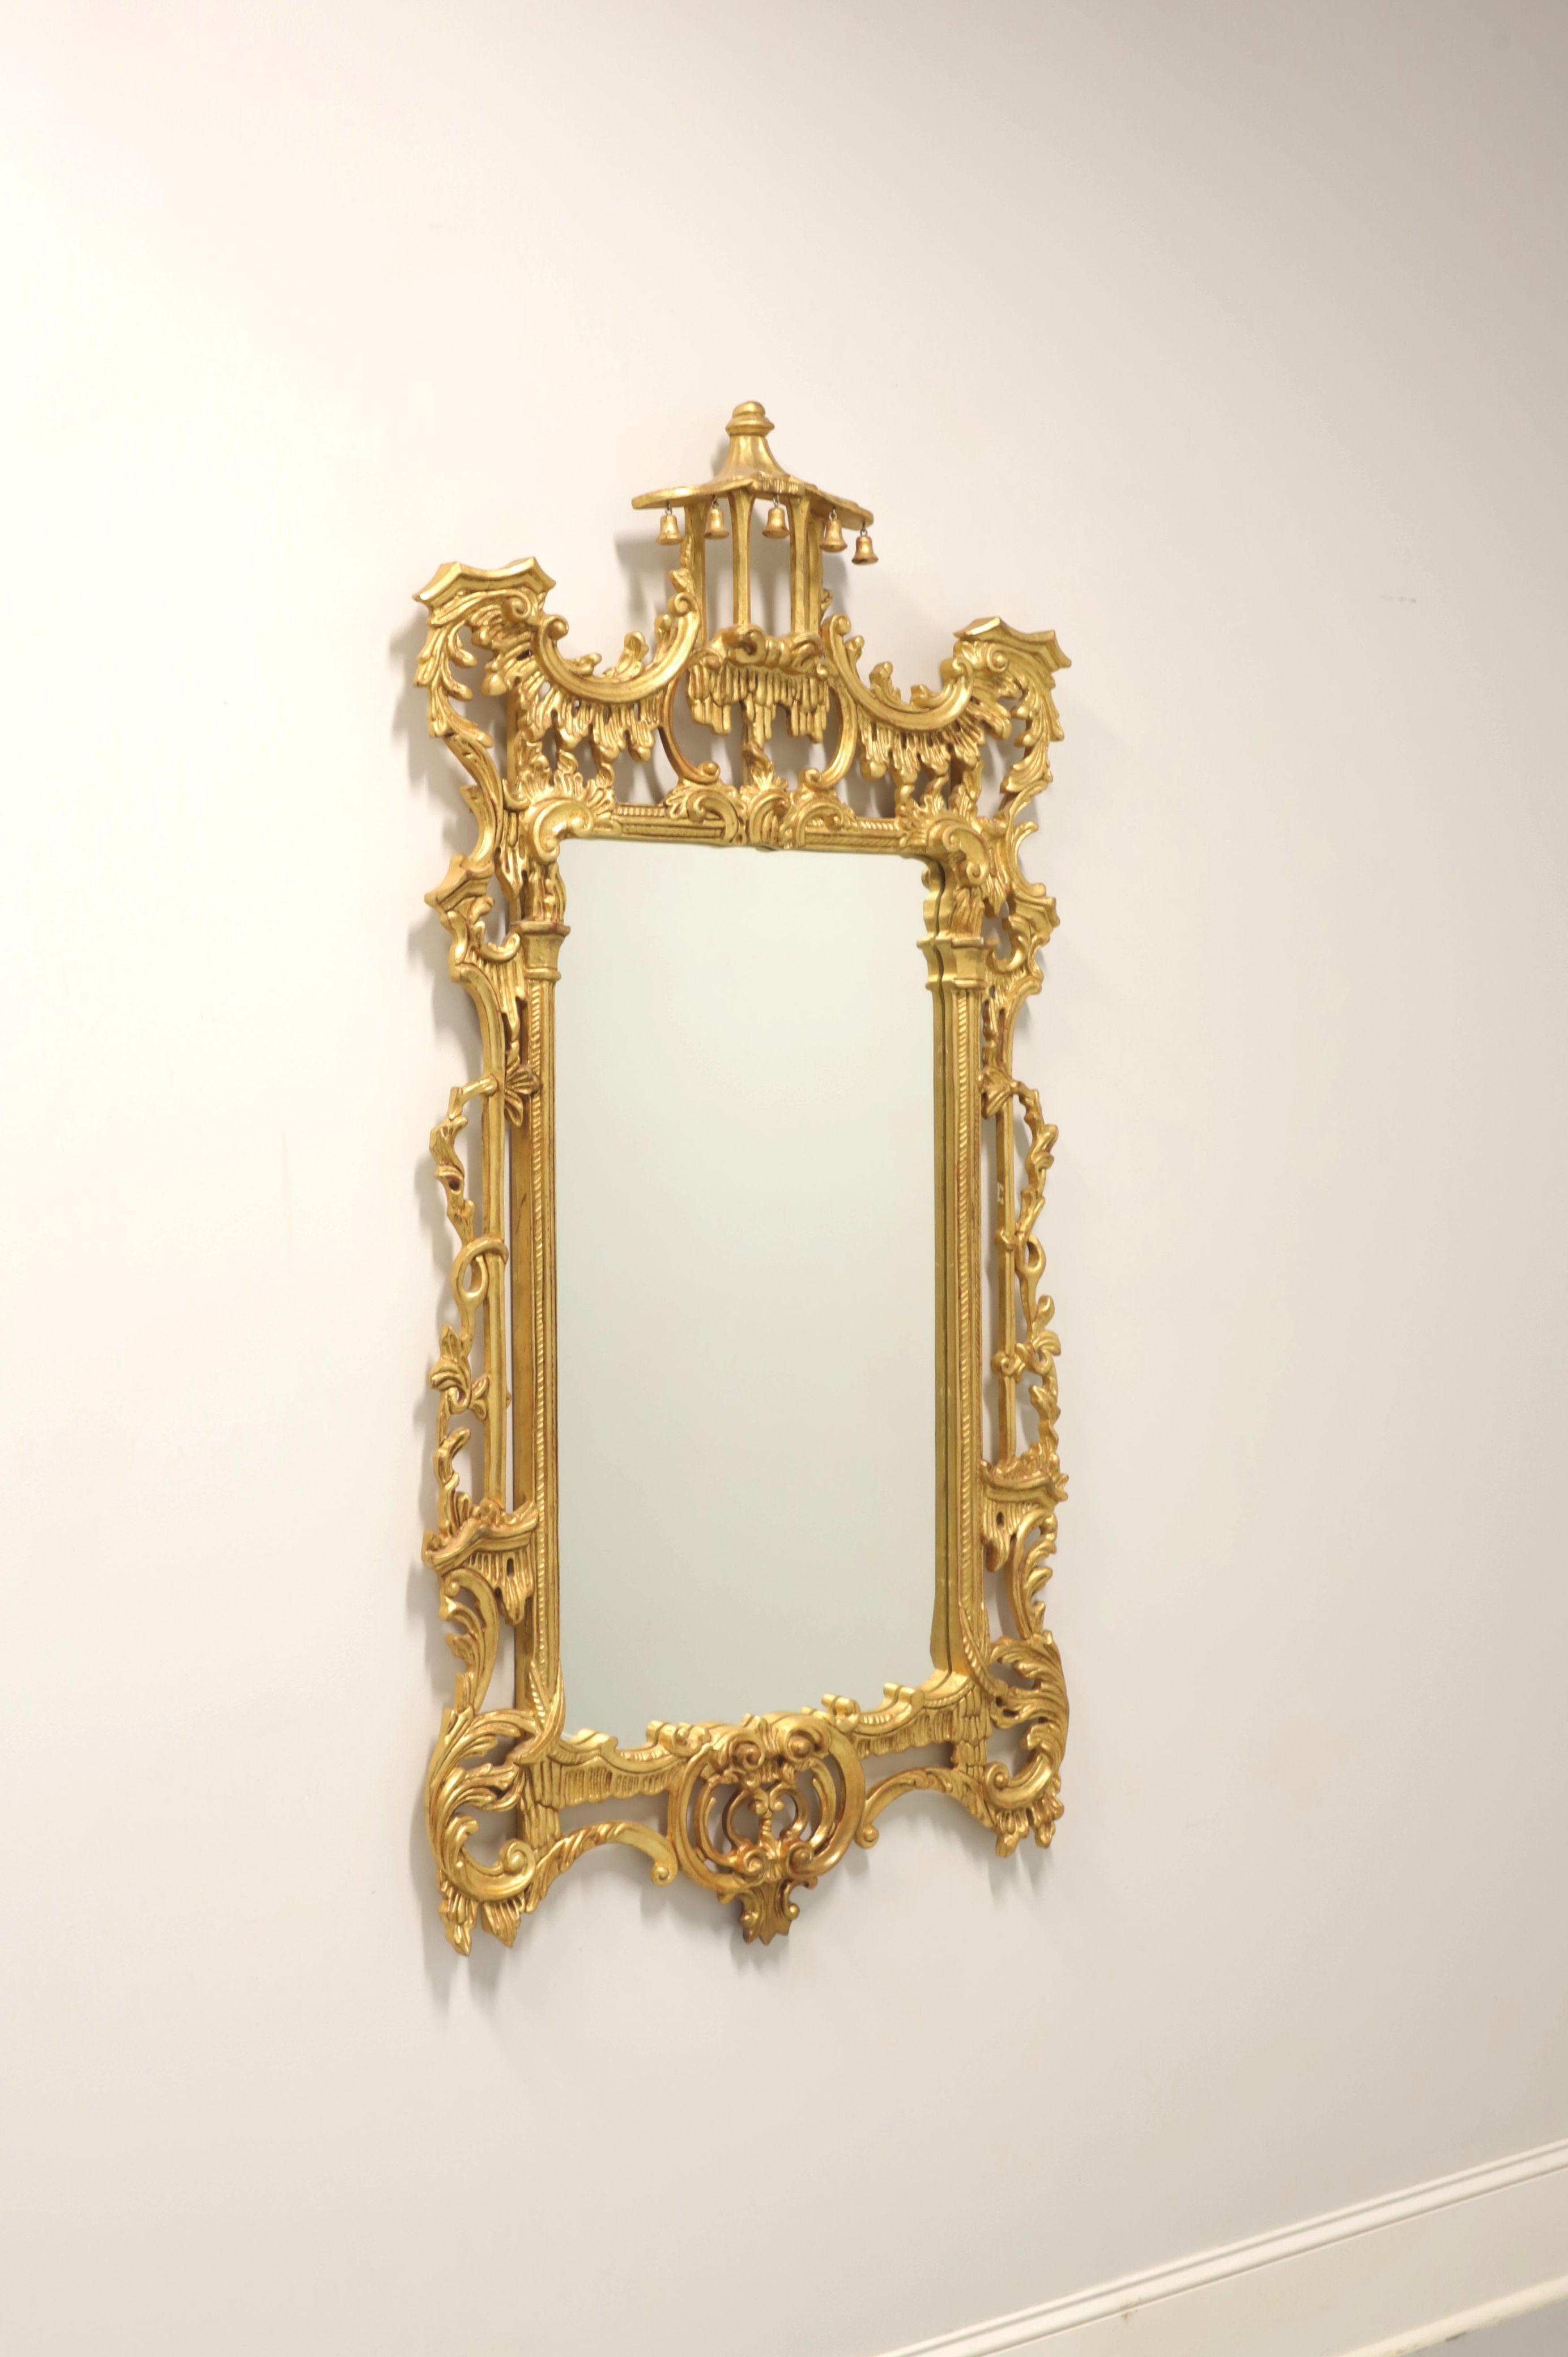 A wall mirror in the Chinese Chippendale style by Labarge. Mirror glass in an intricately carved gold gilt painted wood frame. Features a very decorative design with a carved pagoda to the top center. Made in Italy, in the late 20th